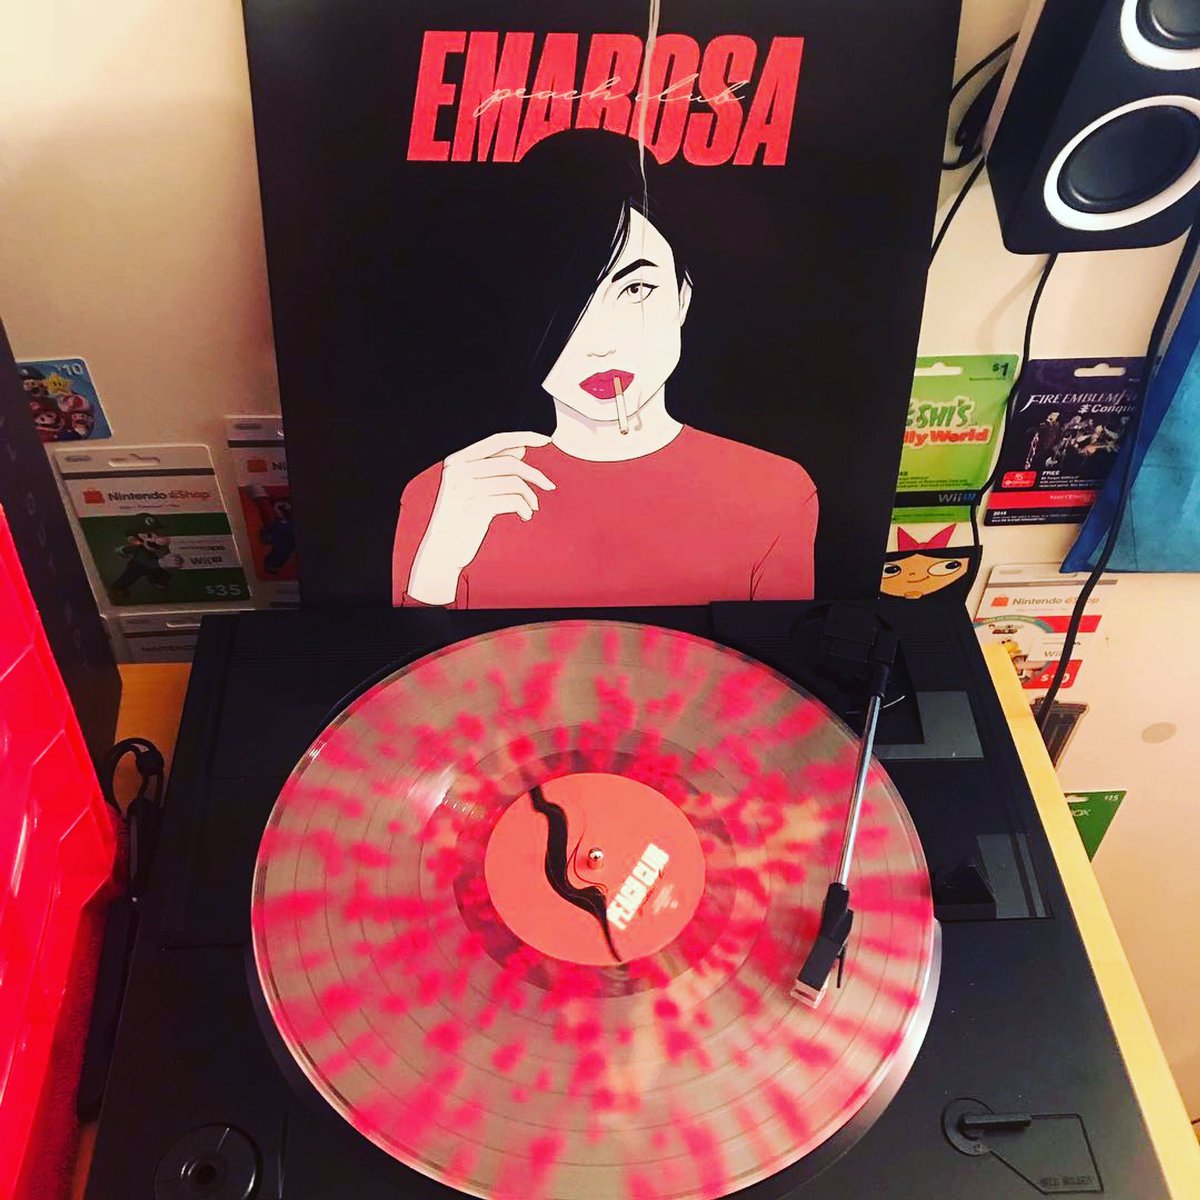 VNYL on Twitter: "Who is picking #emarosa this month for their #vnyl to get this exclusive pink splatter Peach Club?! 👉 https://t.co/ZyVcapsSeJ https://t.co/2ADGbgJrWO" / Twitter